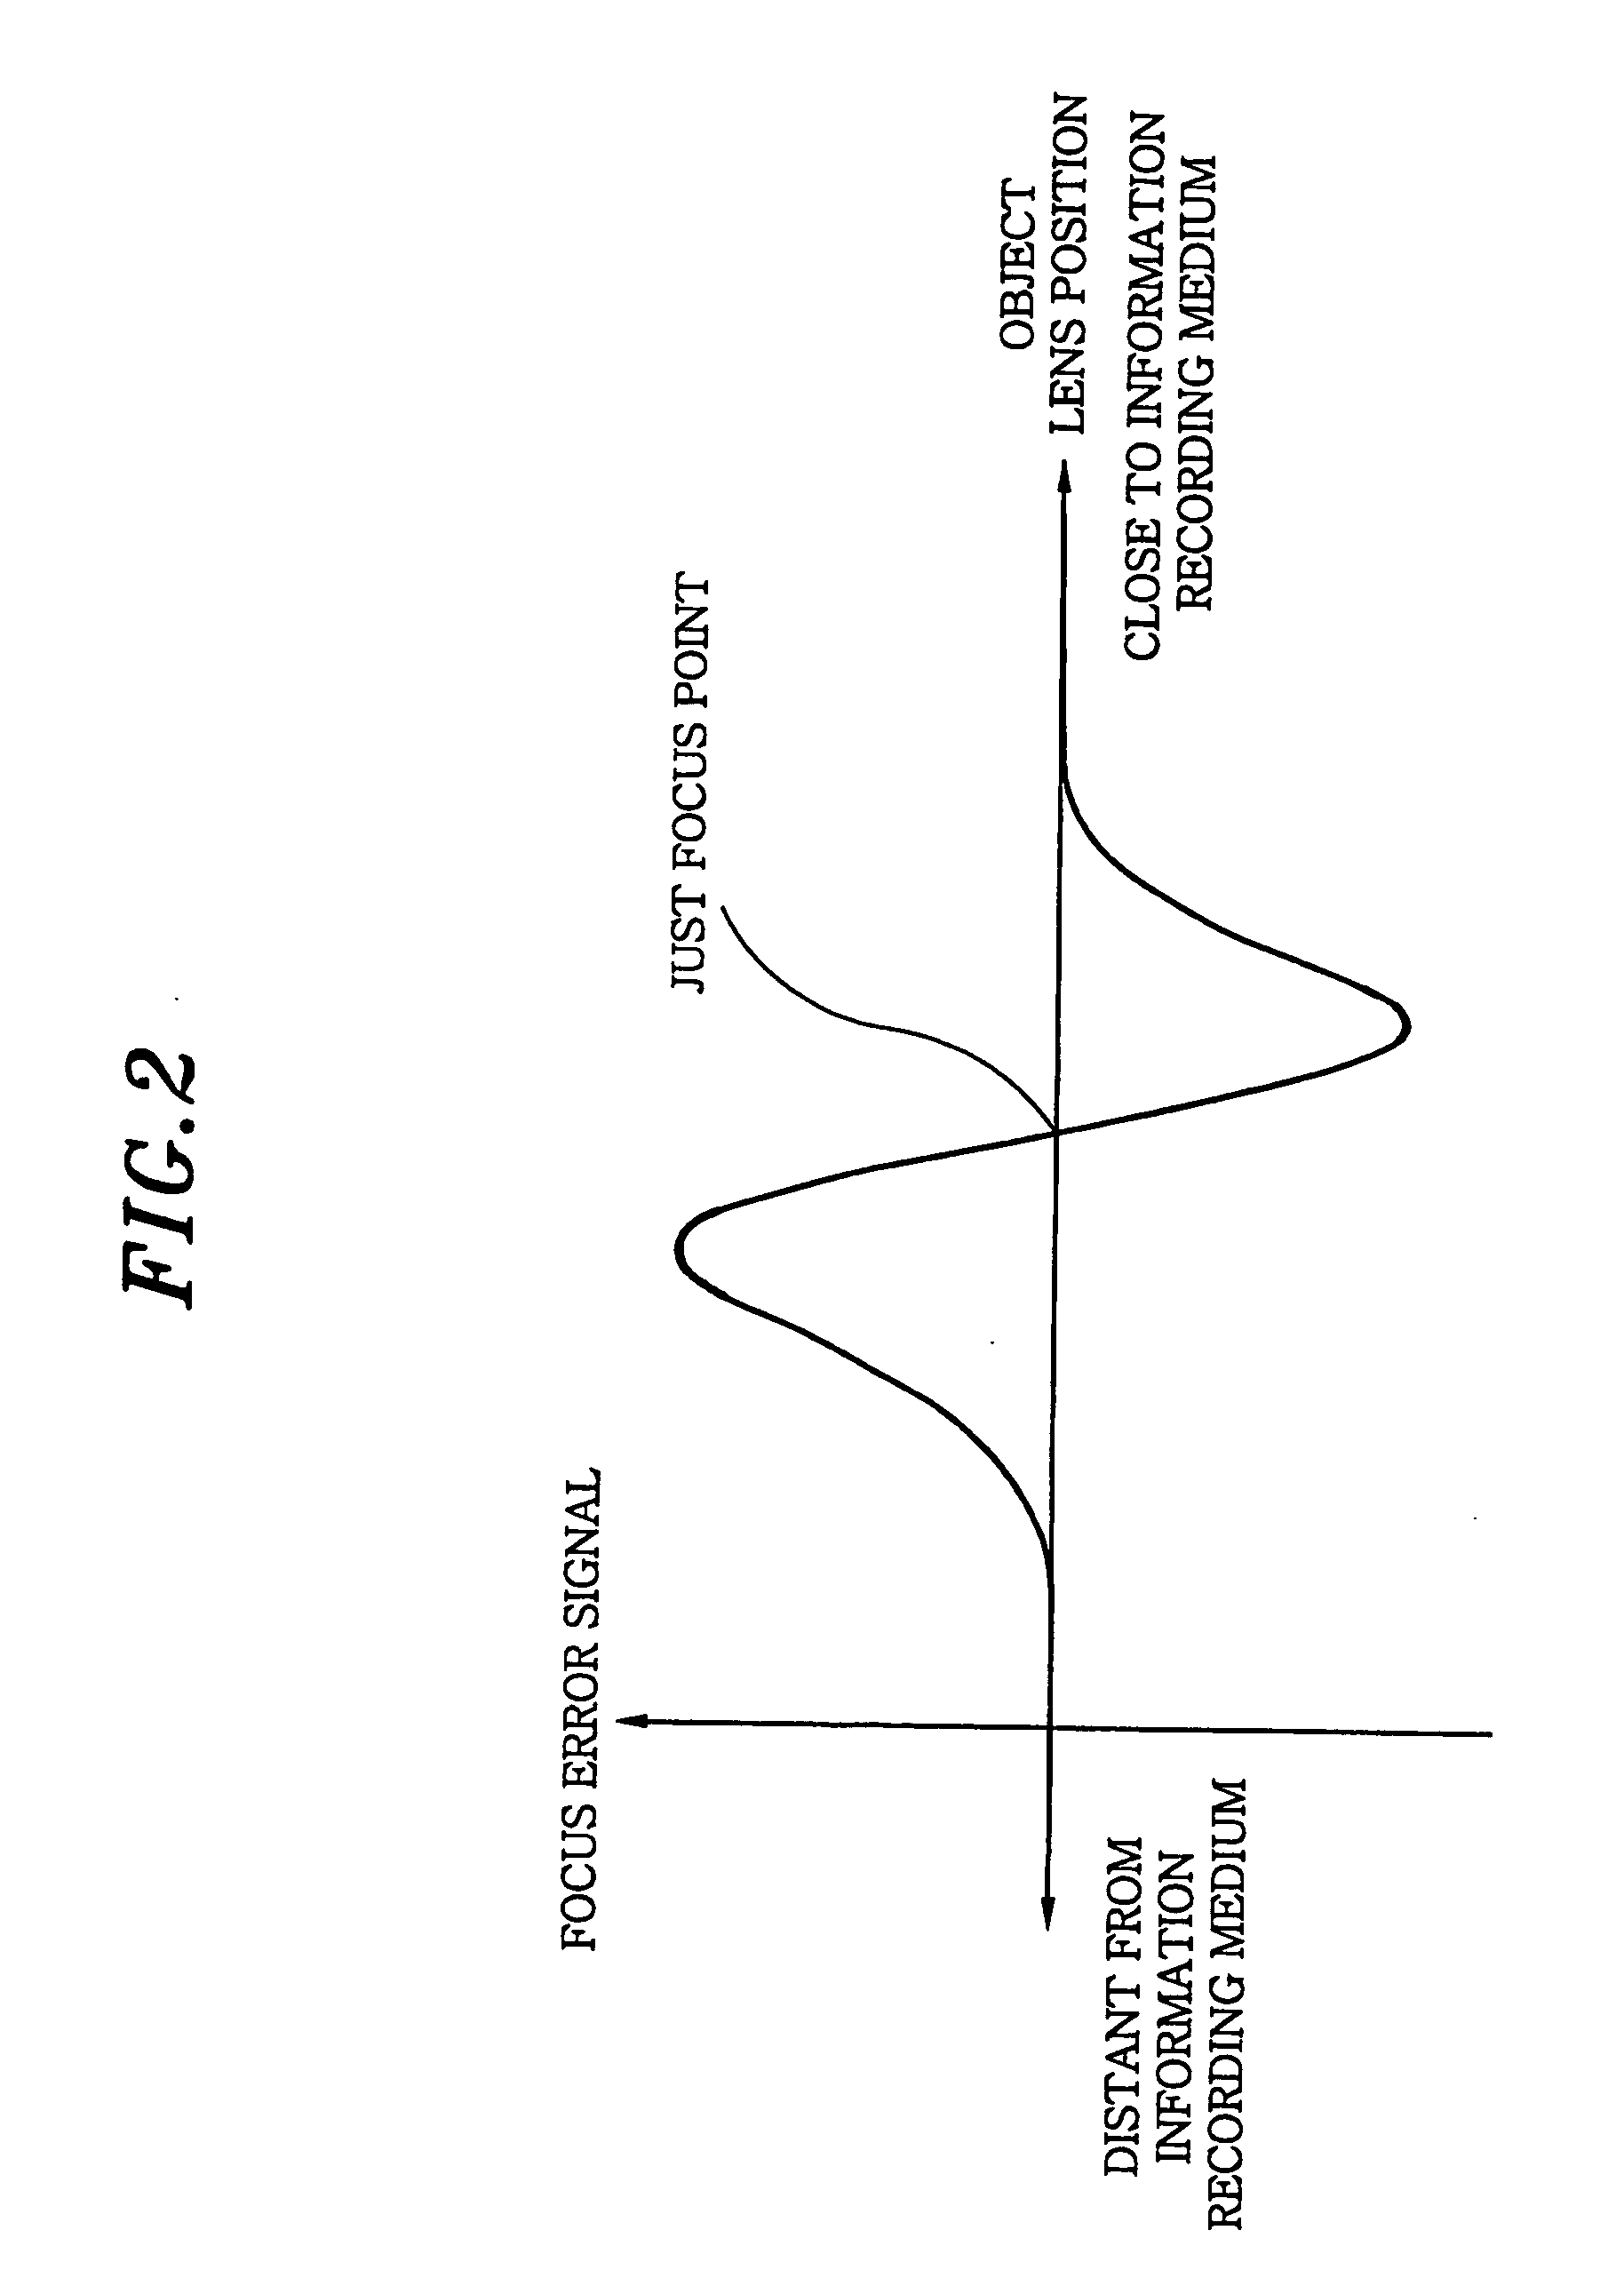 Optical information reproduction method and apparatus